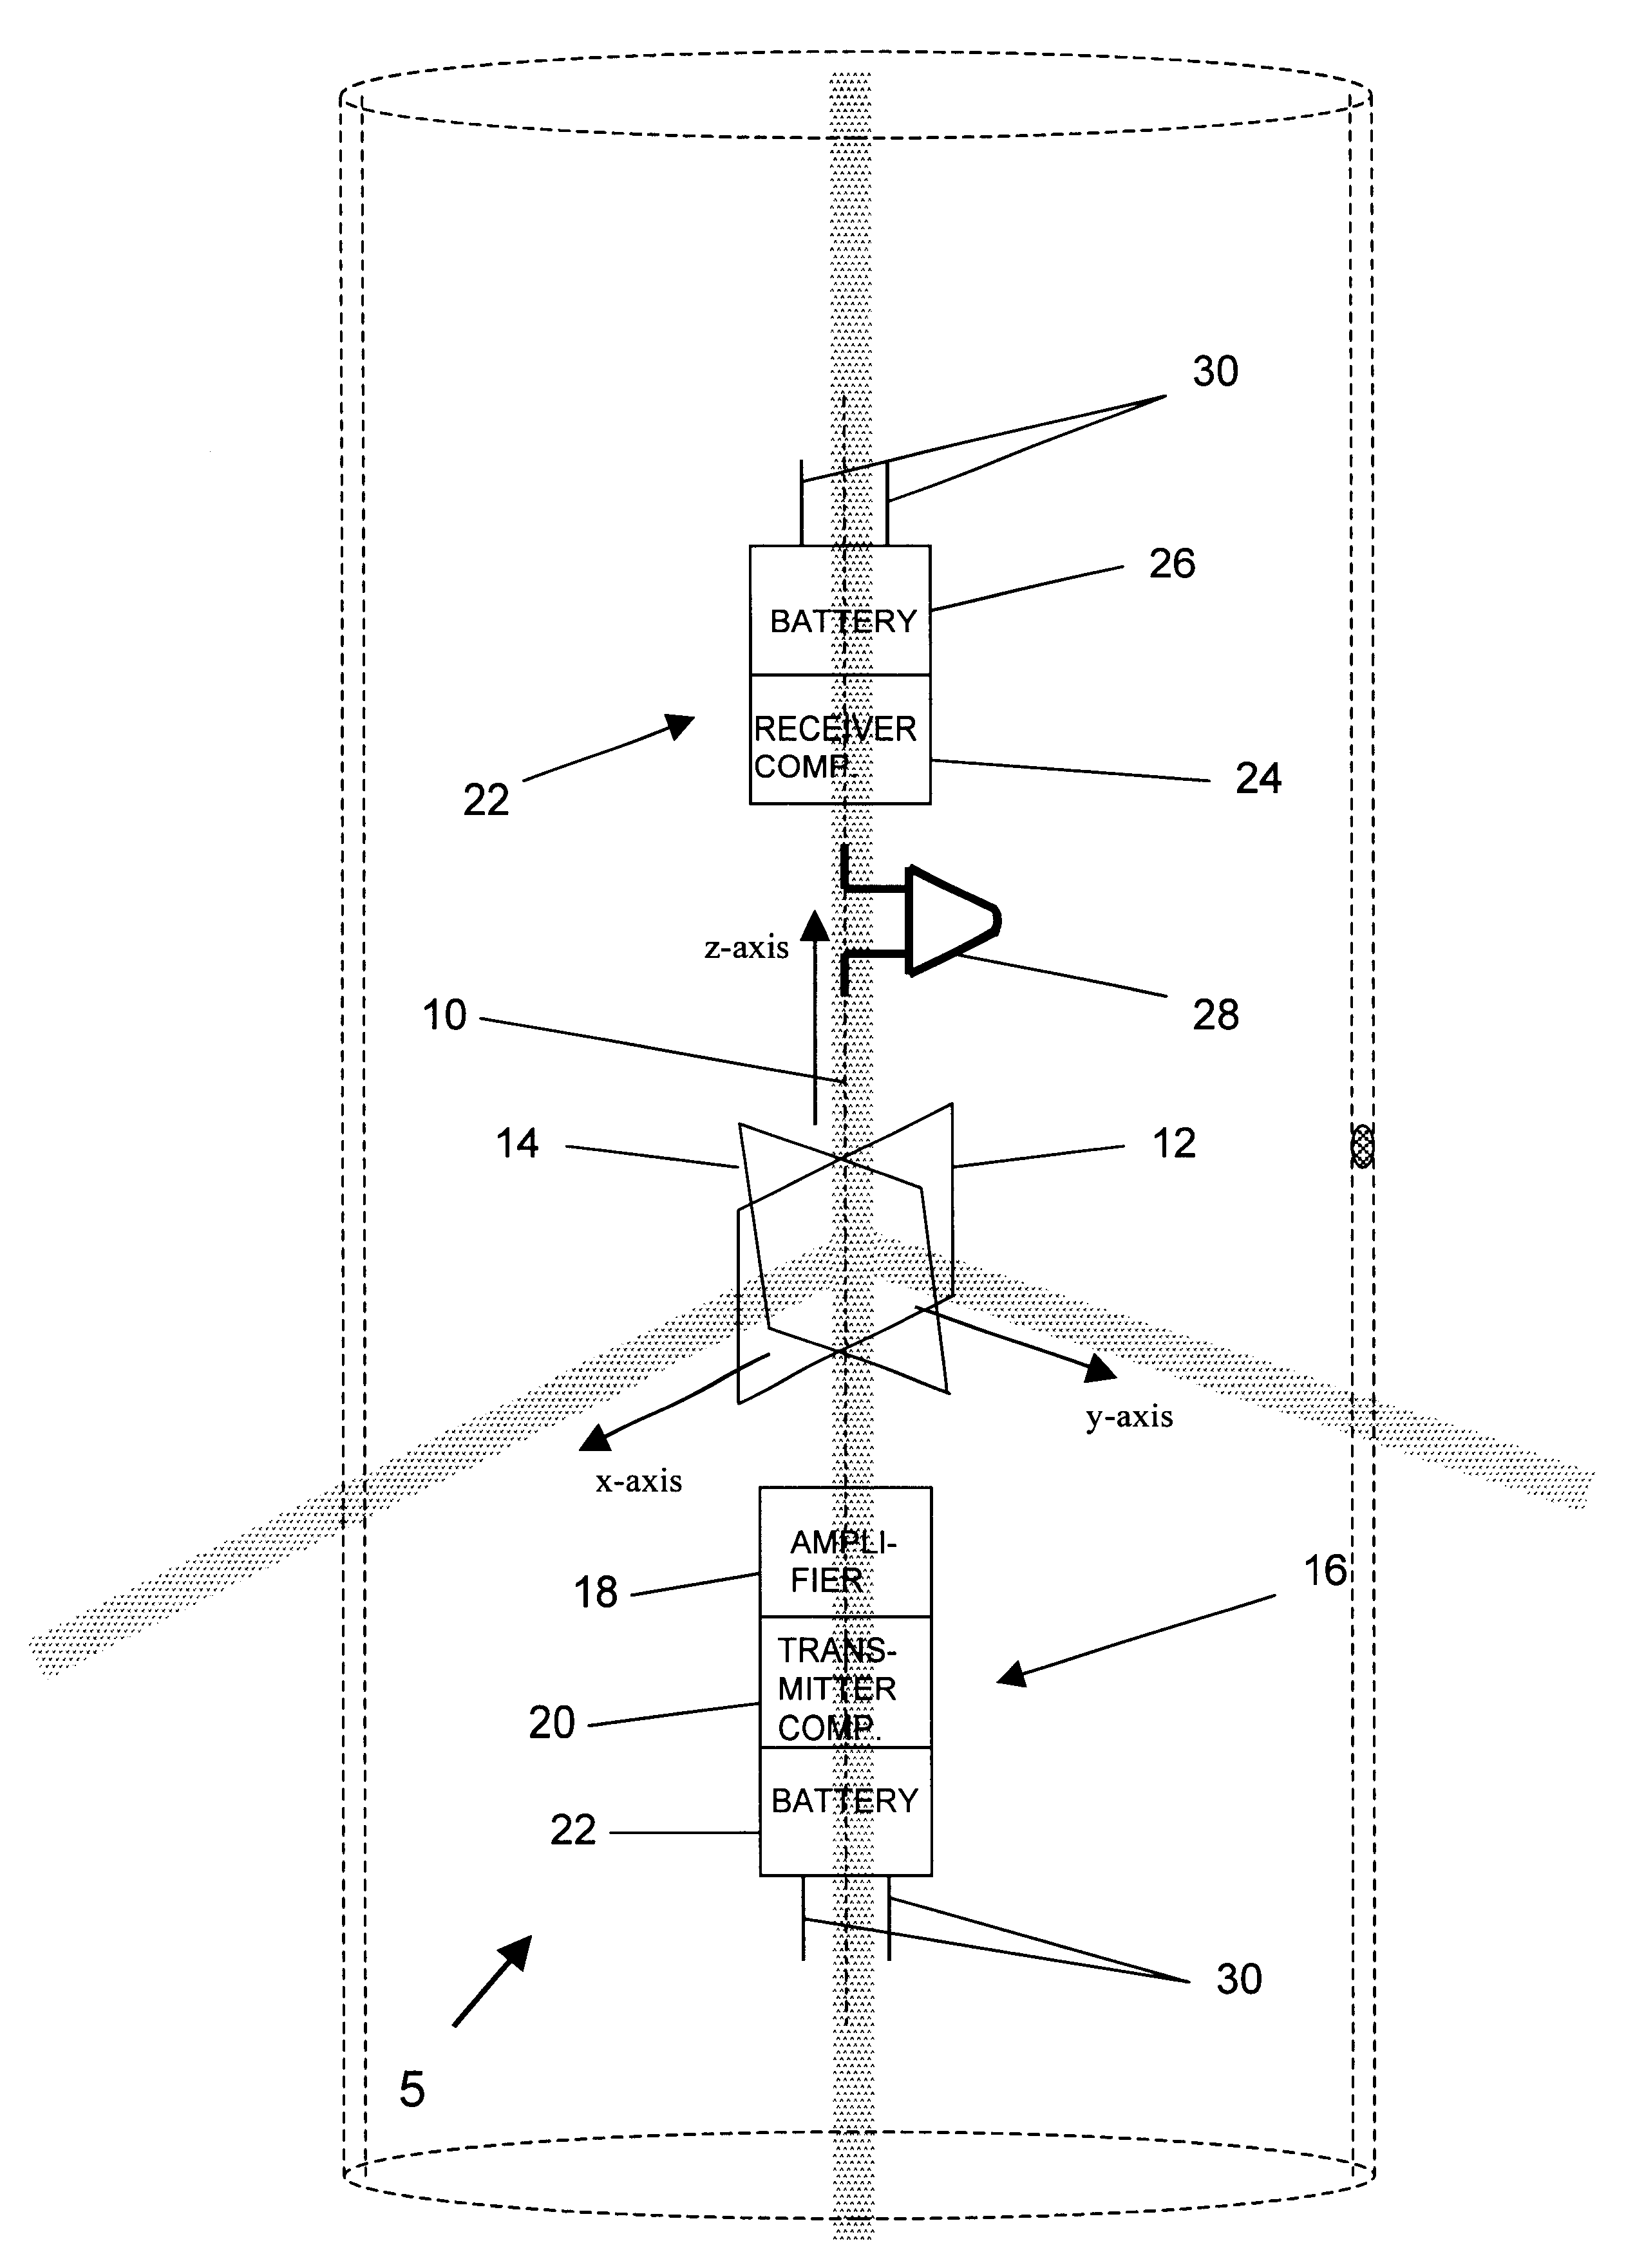 Method and apparatus for detecting external cracks from within a metal tube